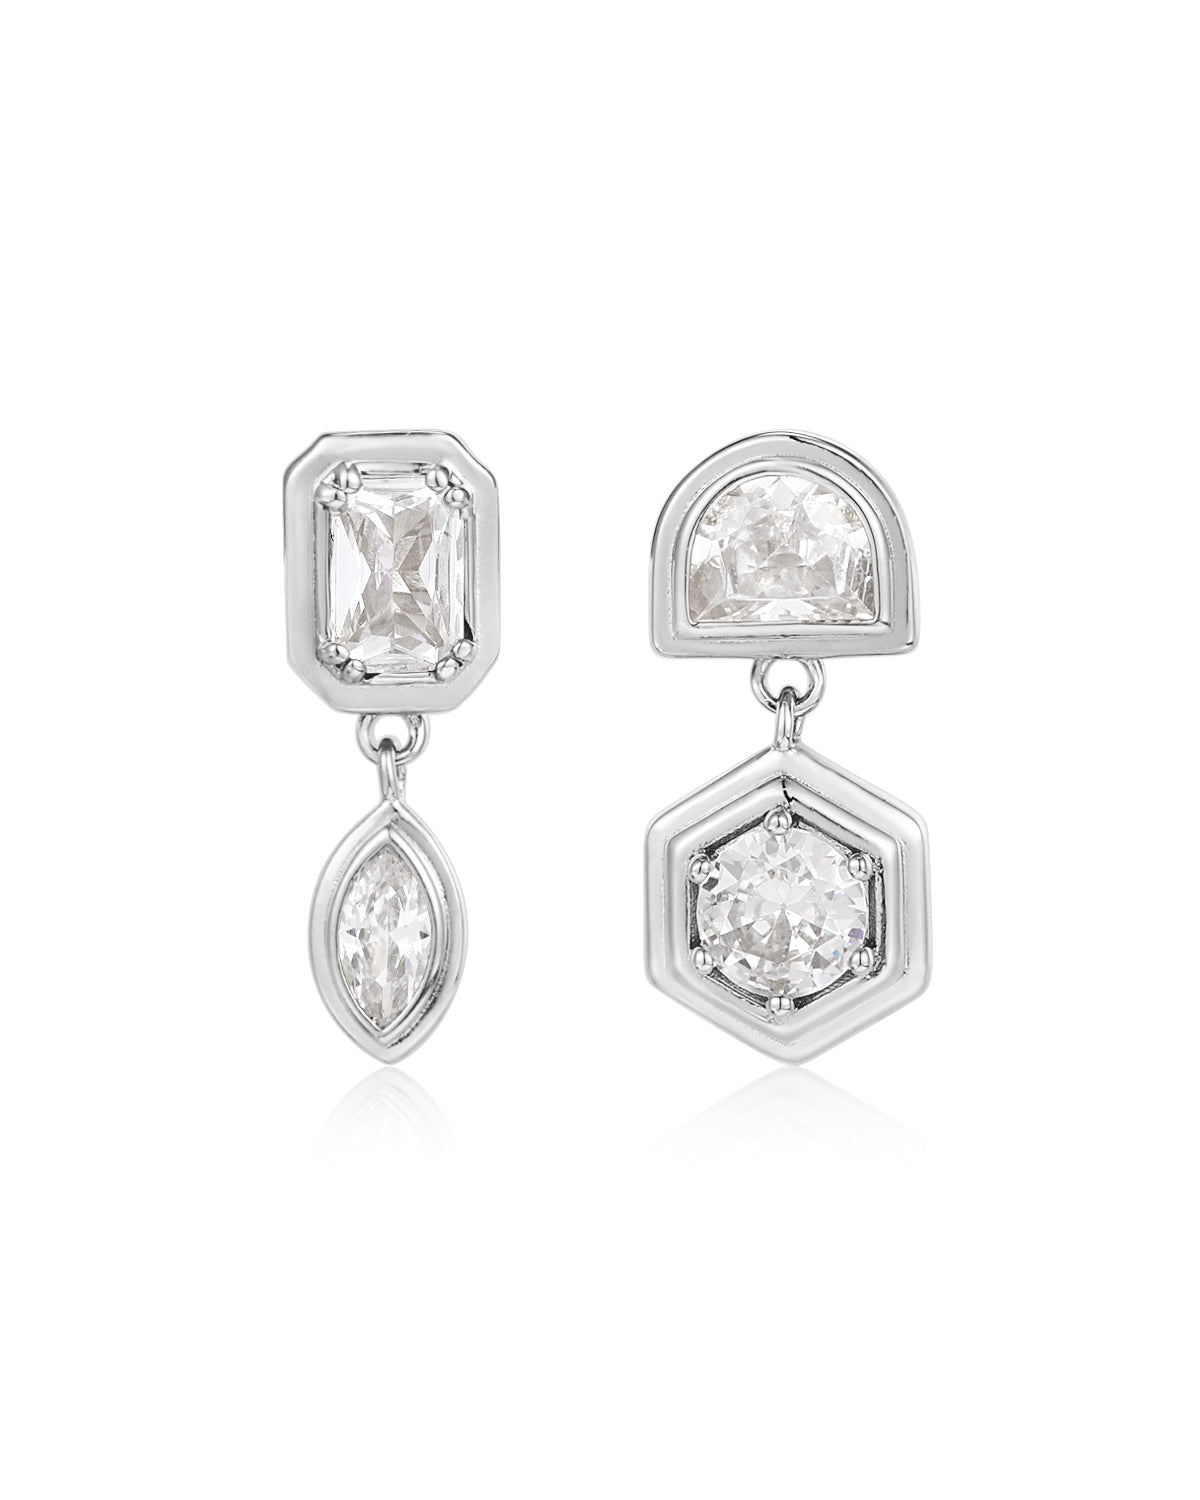 Luv Aj Stellar Bezel Stud Set of 4 Earrings in CZ and Polished Rhodium Plated